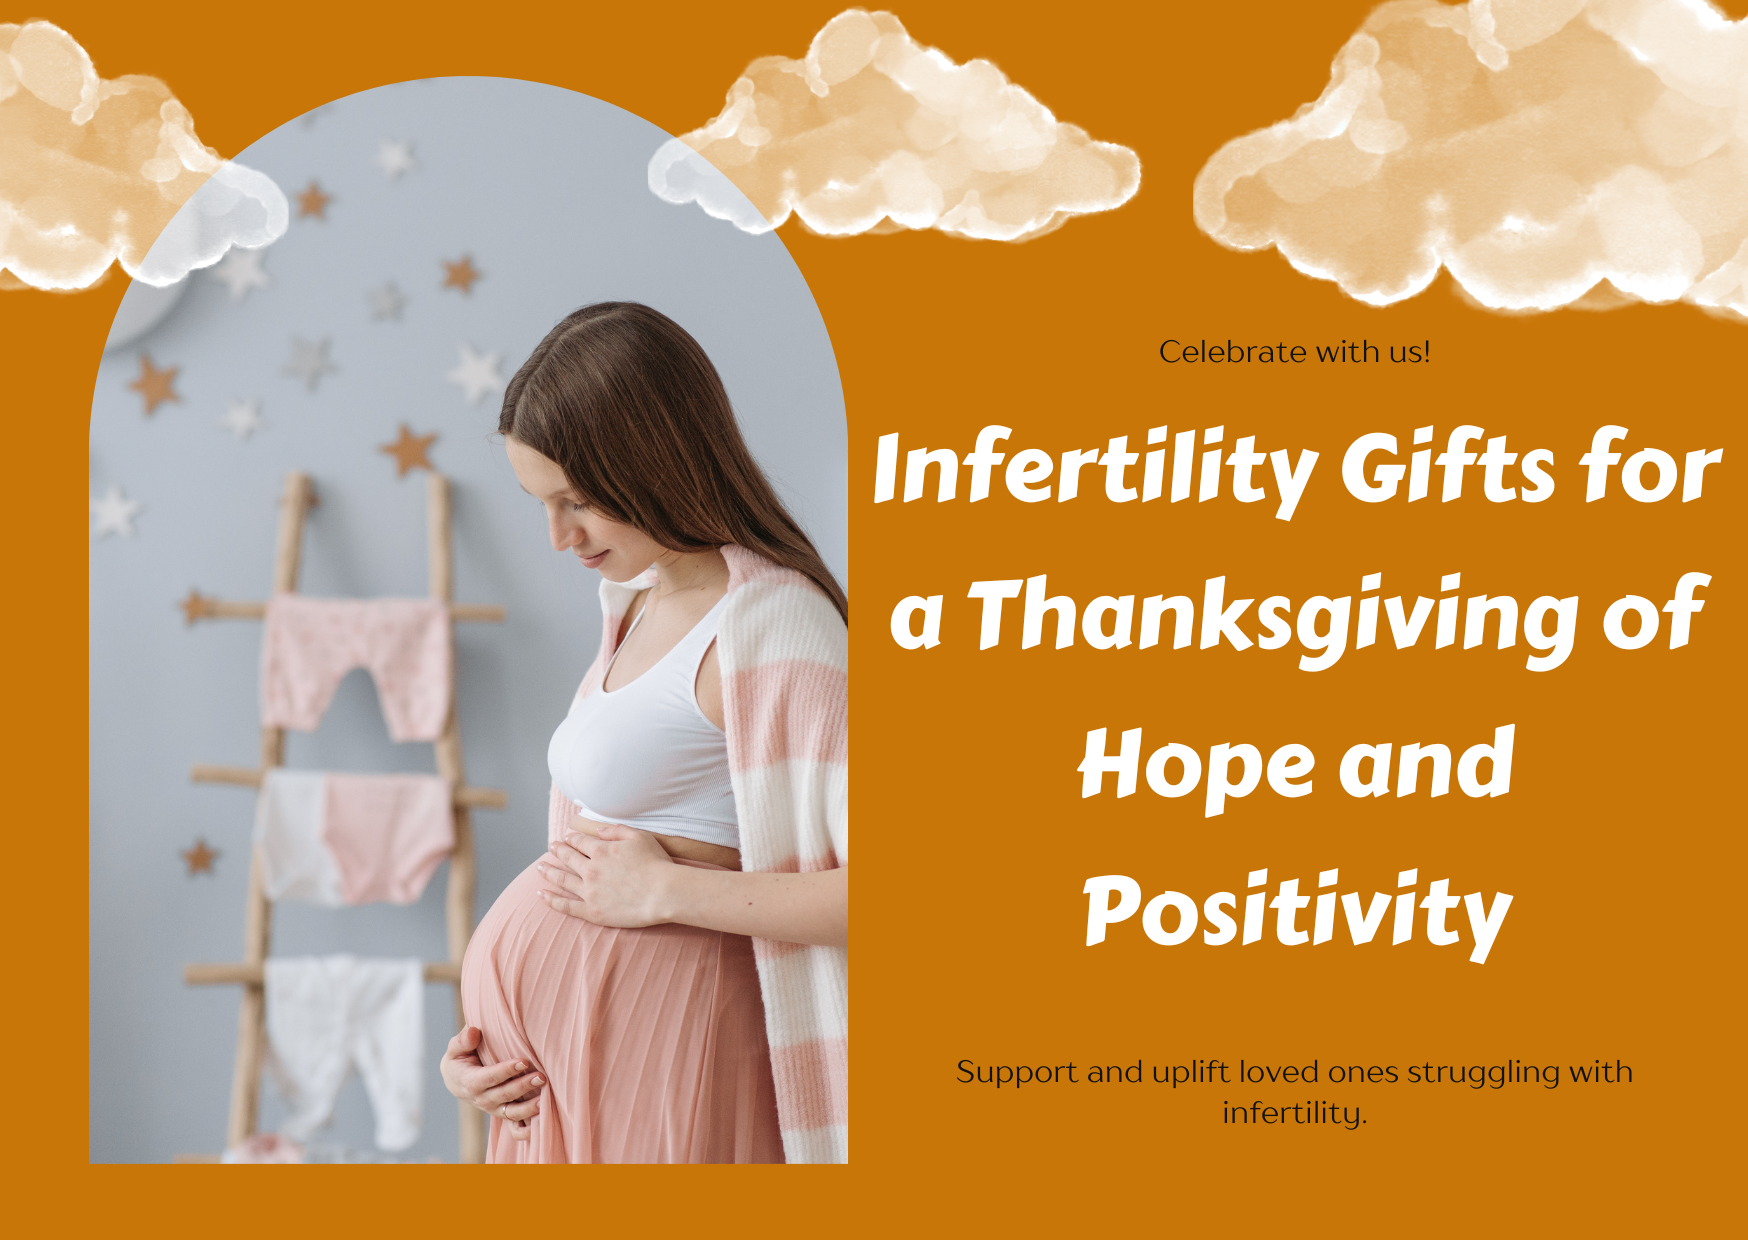 Celebrate Hope and Positivity: Infertility Gifts for the Thanksgiving Table